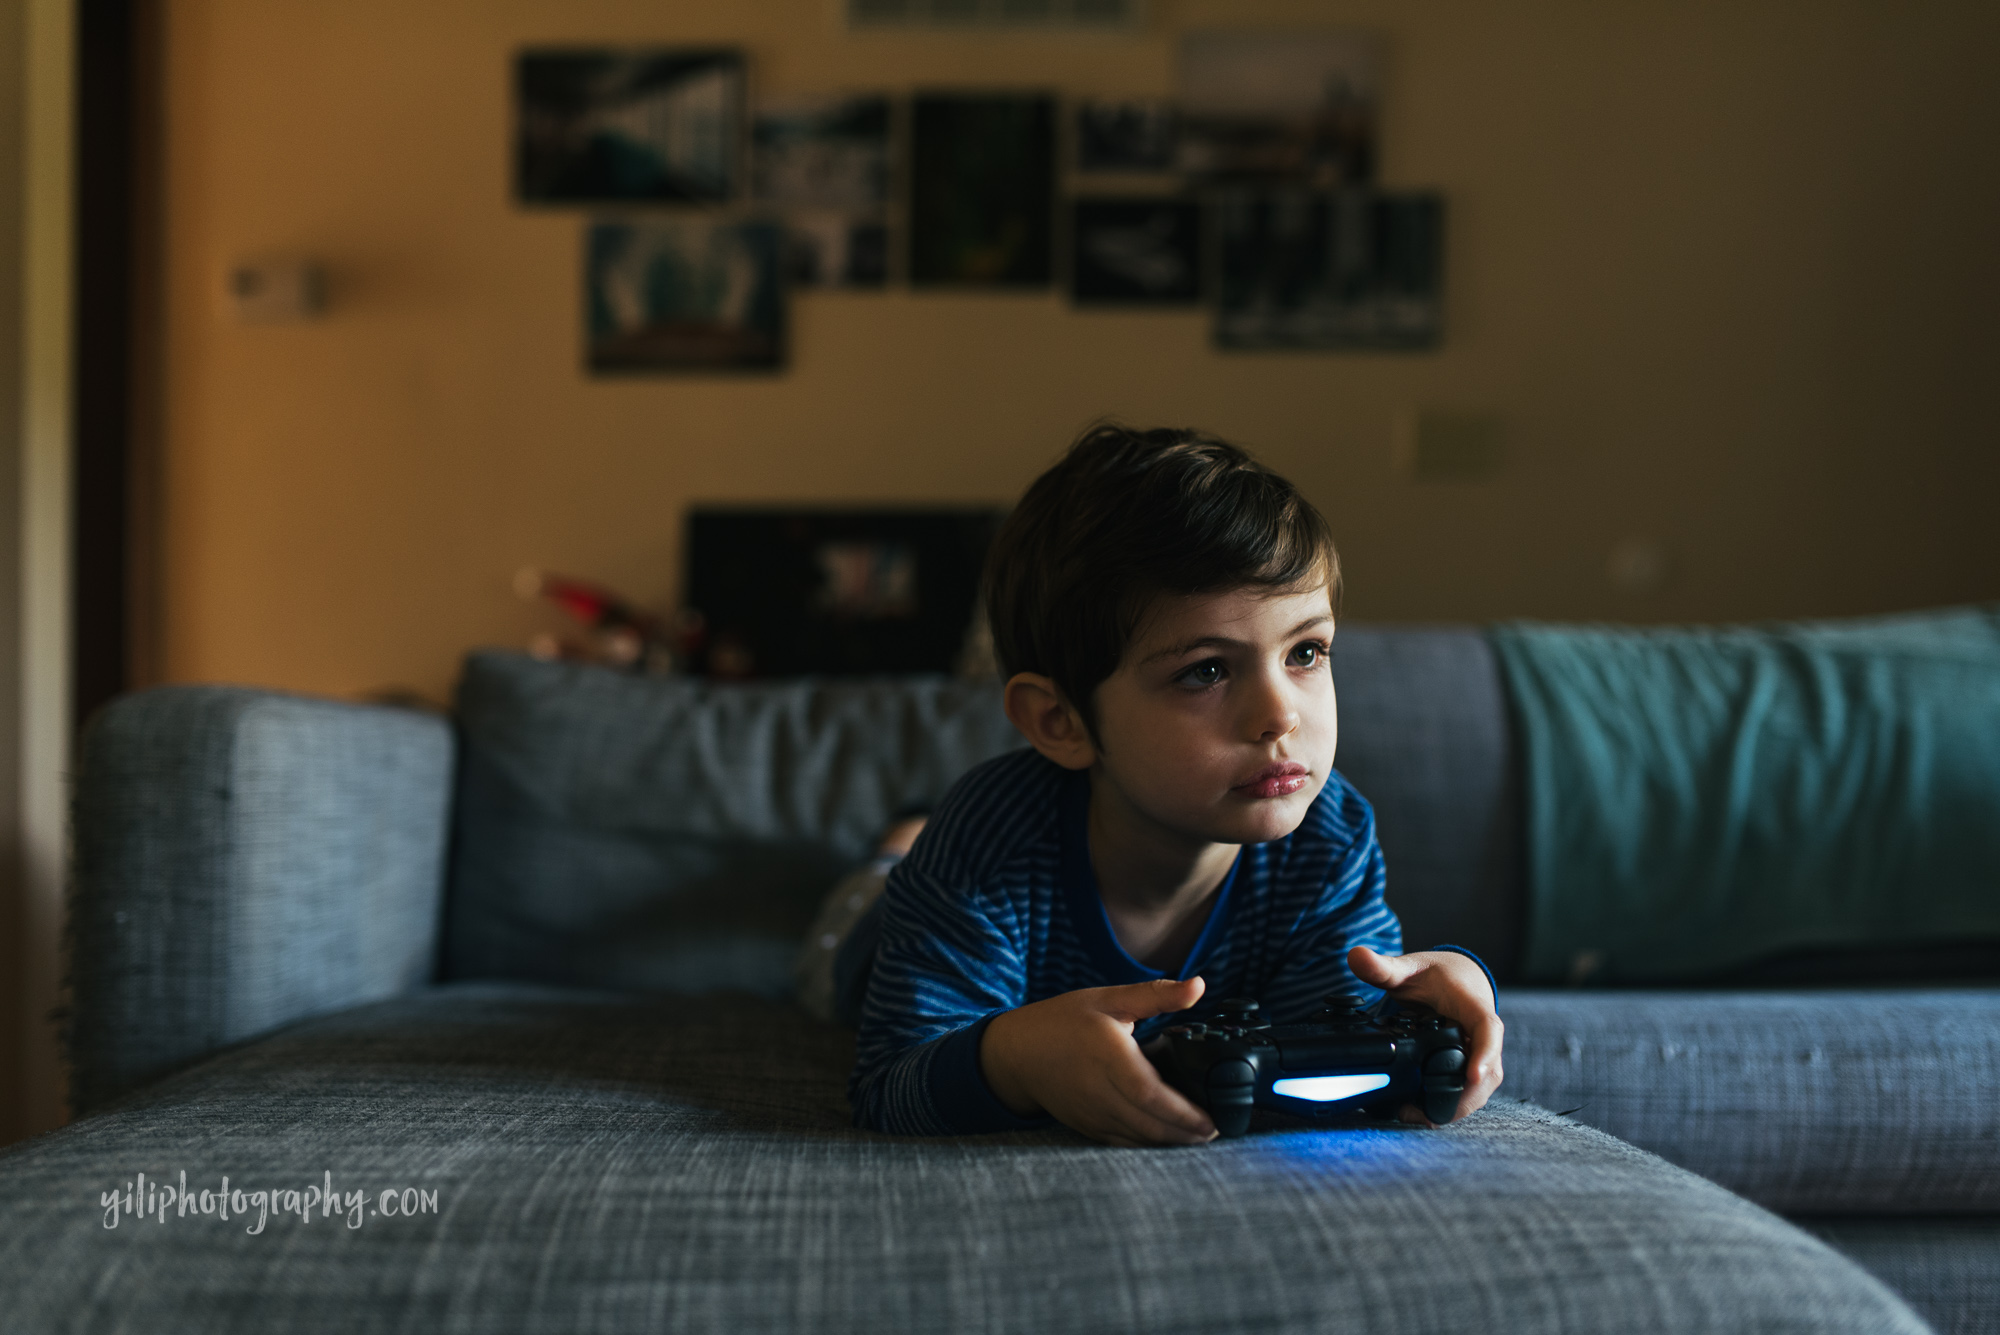 seattle toddler holding video game controller